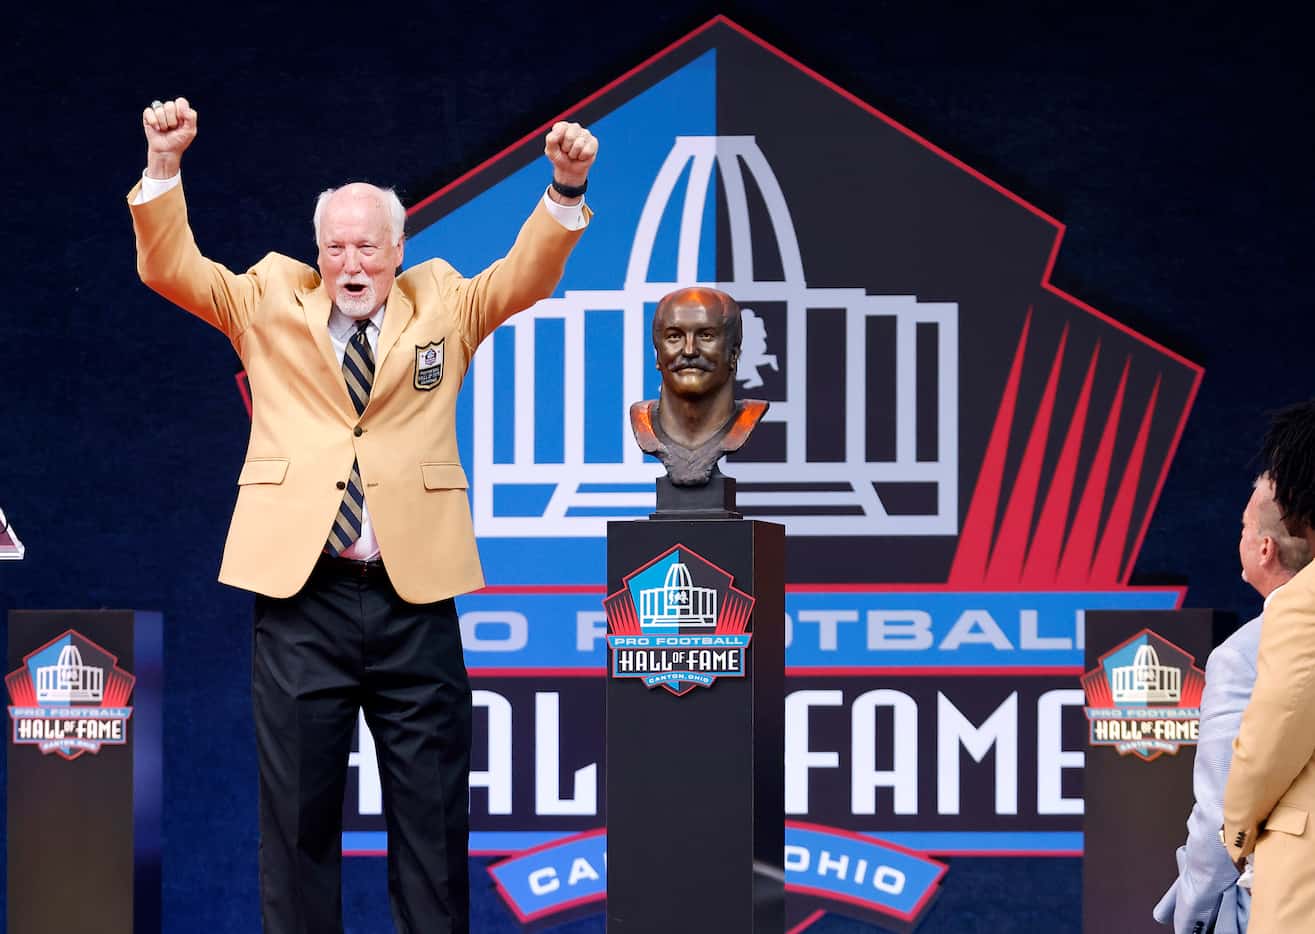 Pro Football Hall of Fame inductee Cliff Harris of the Dallas Cowboys reacts after unveiling...